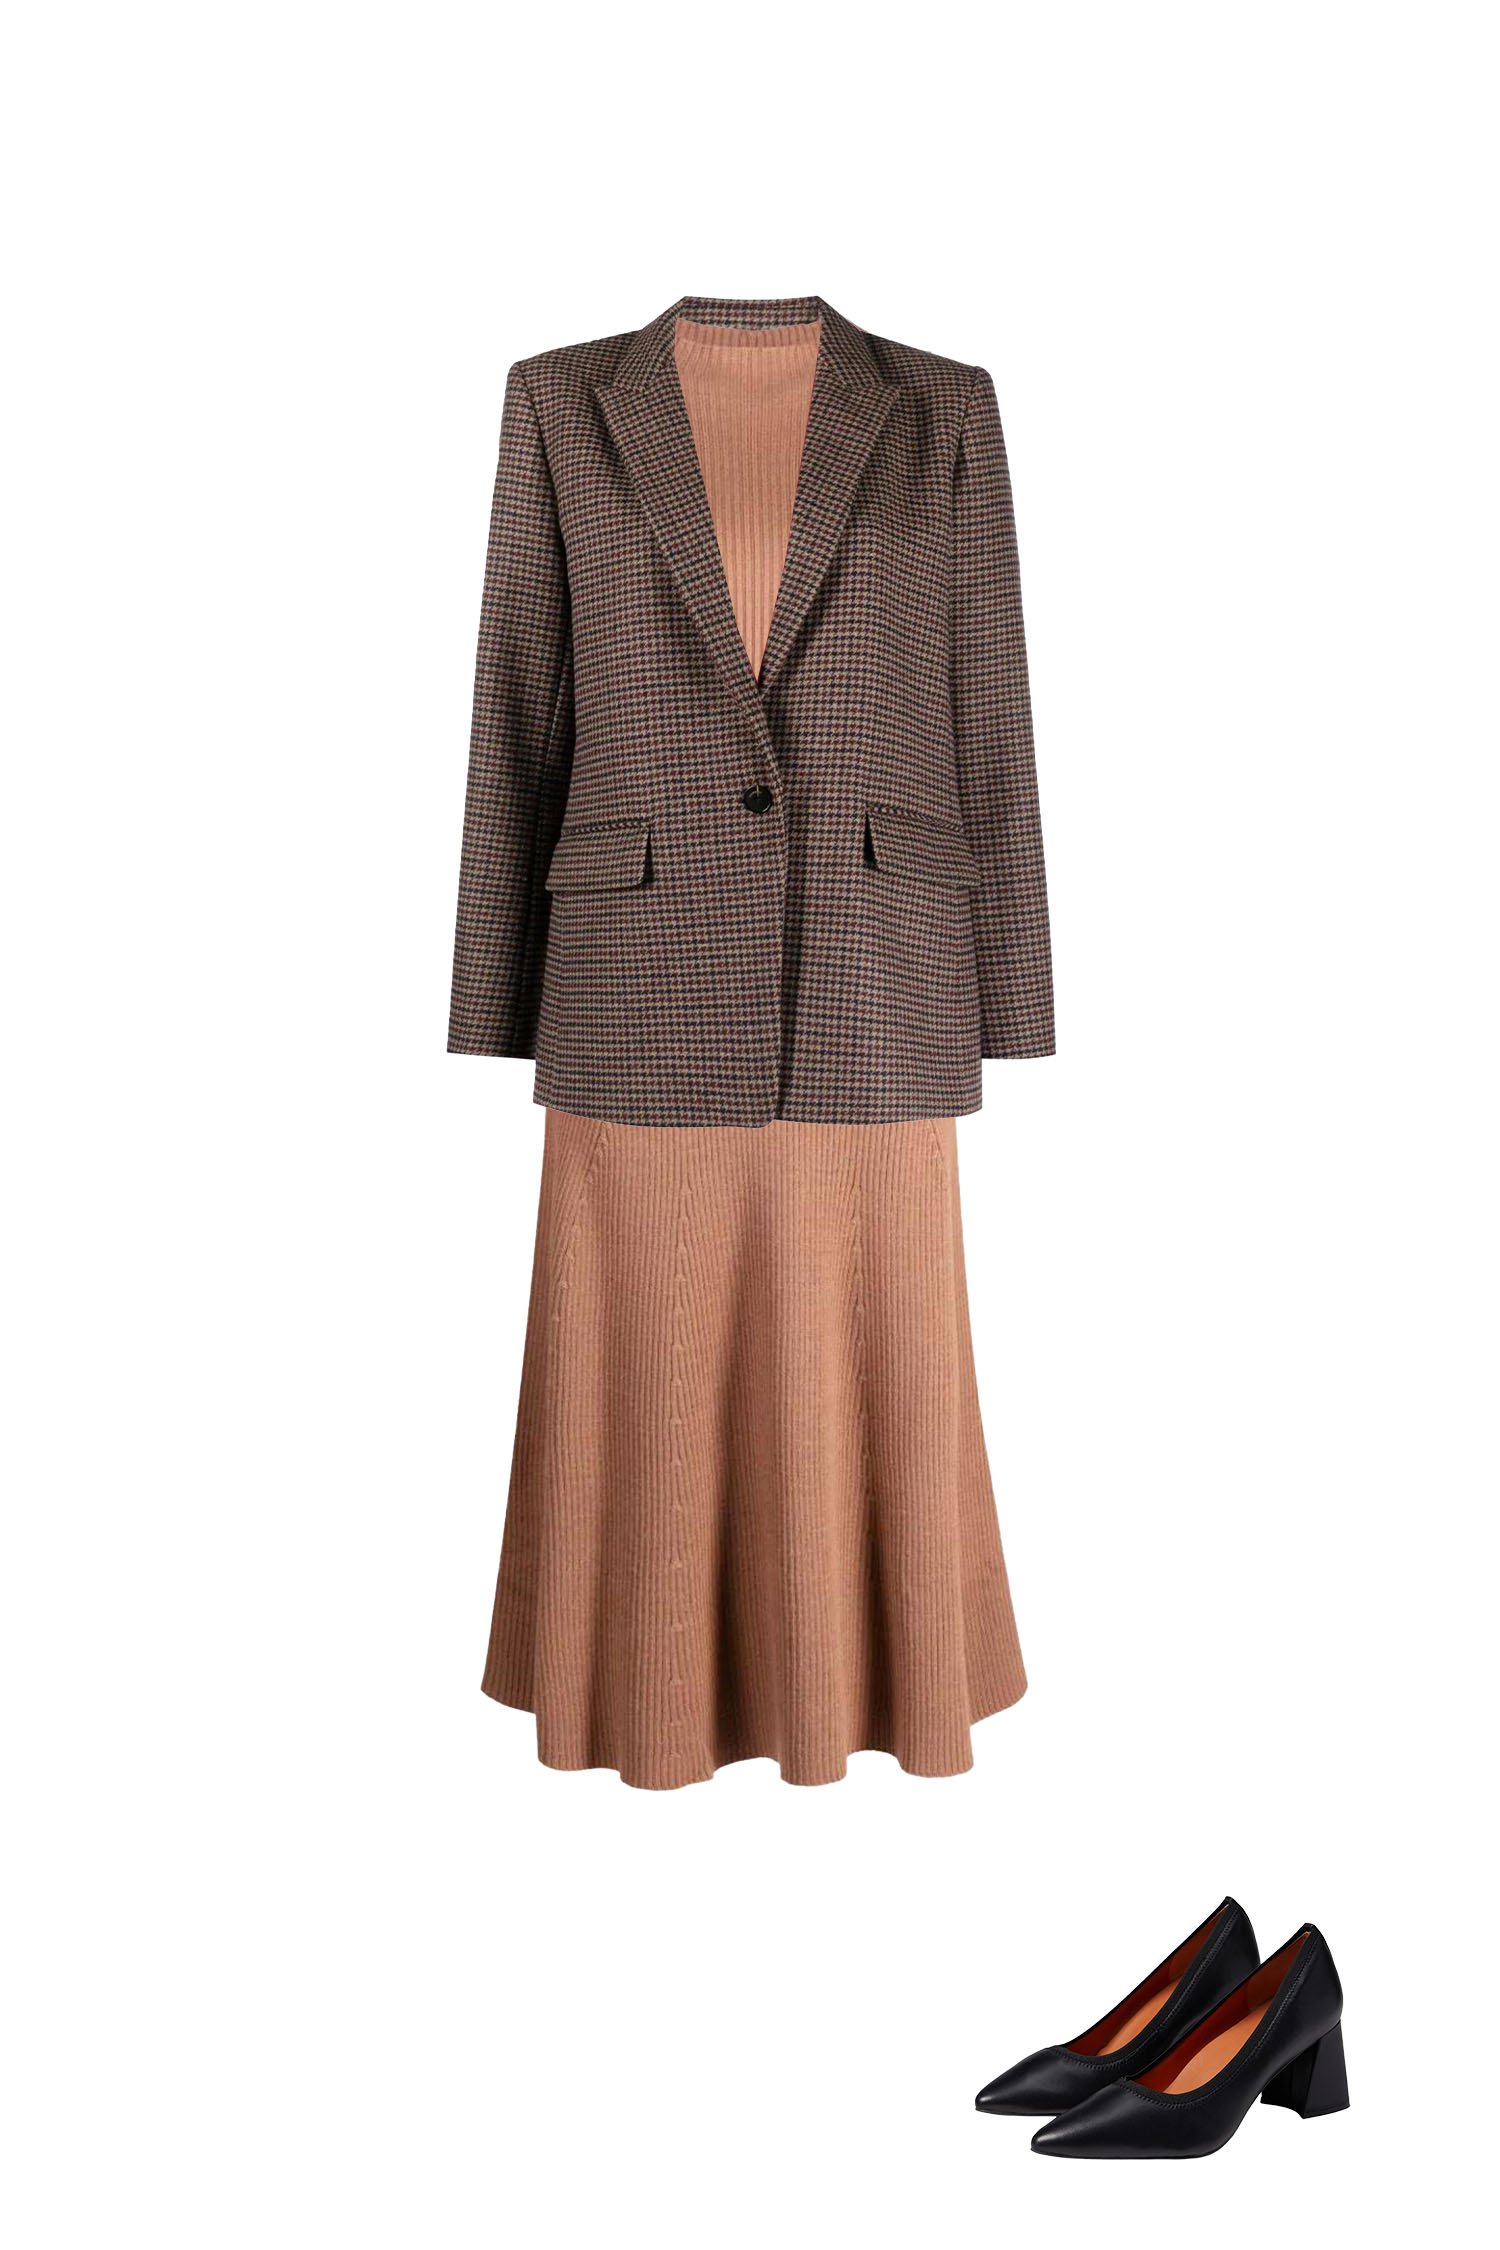 Spring Office Outfit - Camel Ribbed Knitted Midi Dress, Brown Houndstooth Blazer, Black Block Heel Pumps